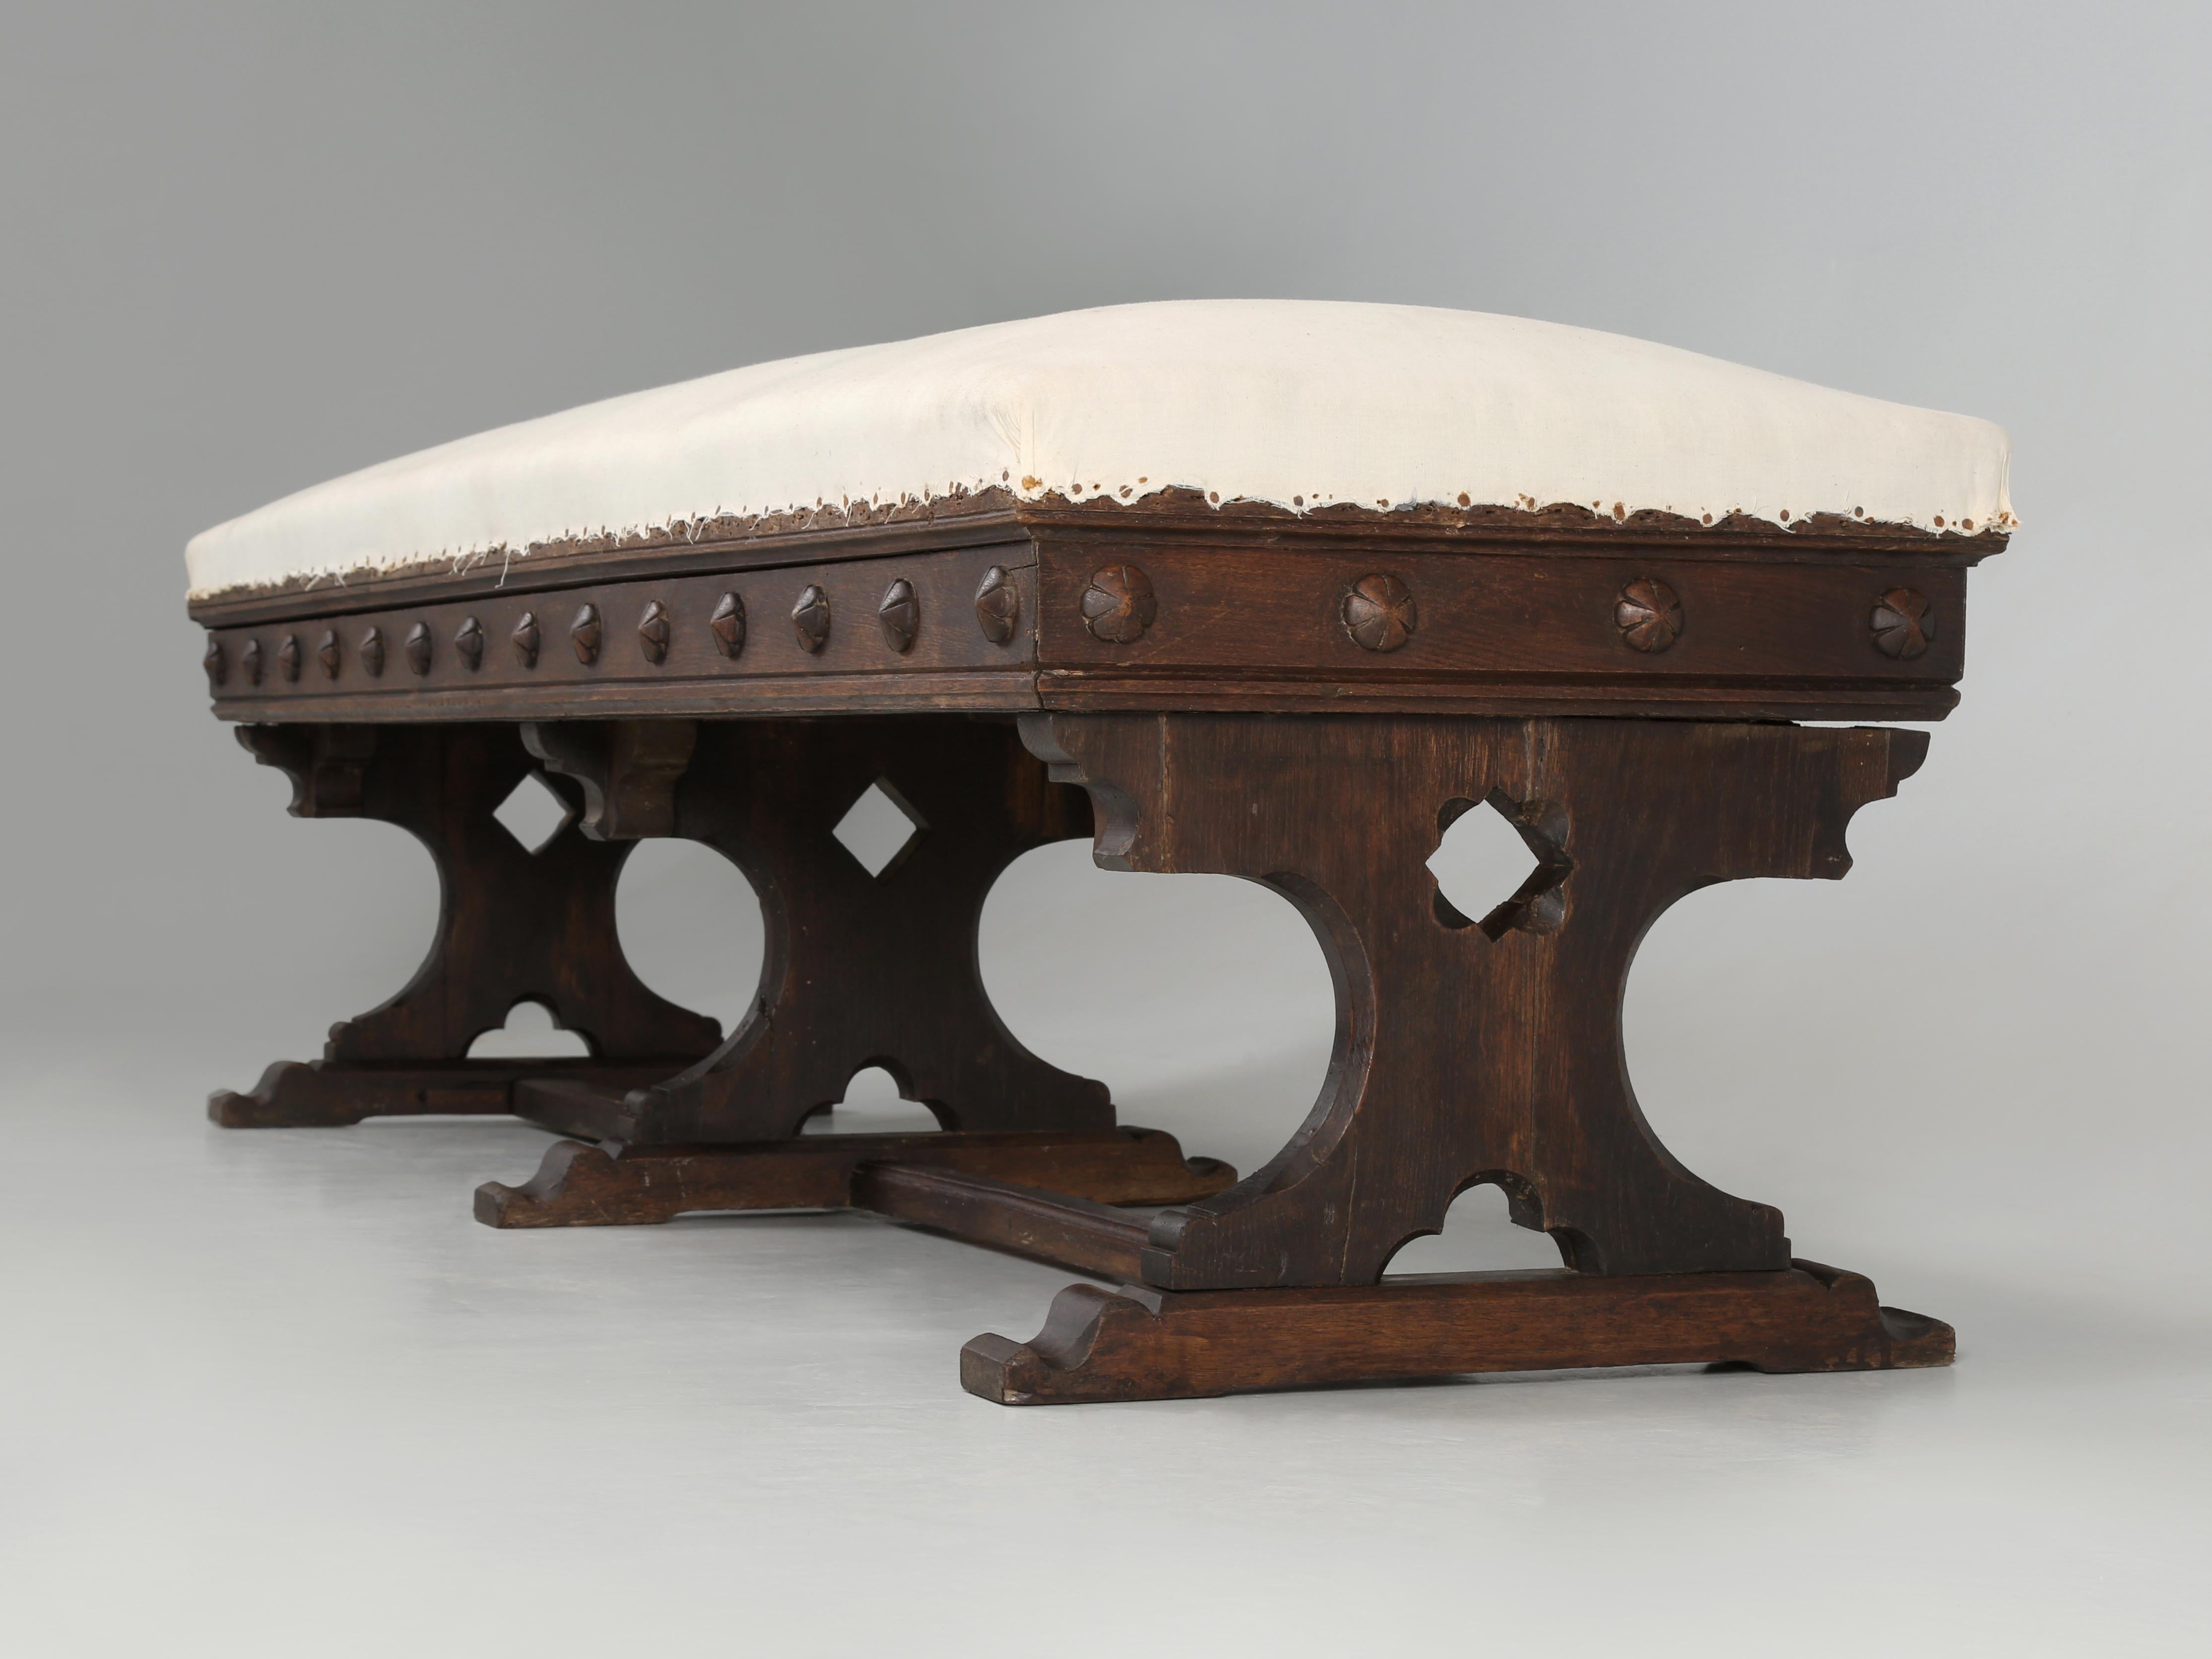 Antique French Upholstered Bench from the mid-1800’s and appears to still be in its Original Finish. Structurally sound and currently covered in just muslin. The bench is an unusual scale and I do not believe we have ever seen another quite like it.